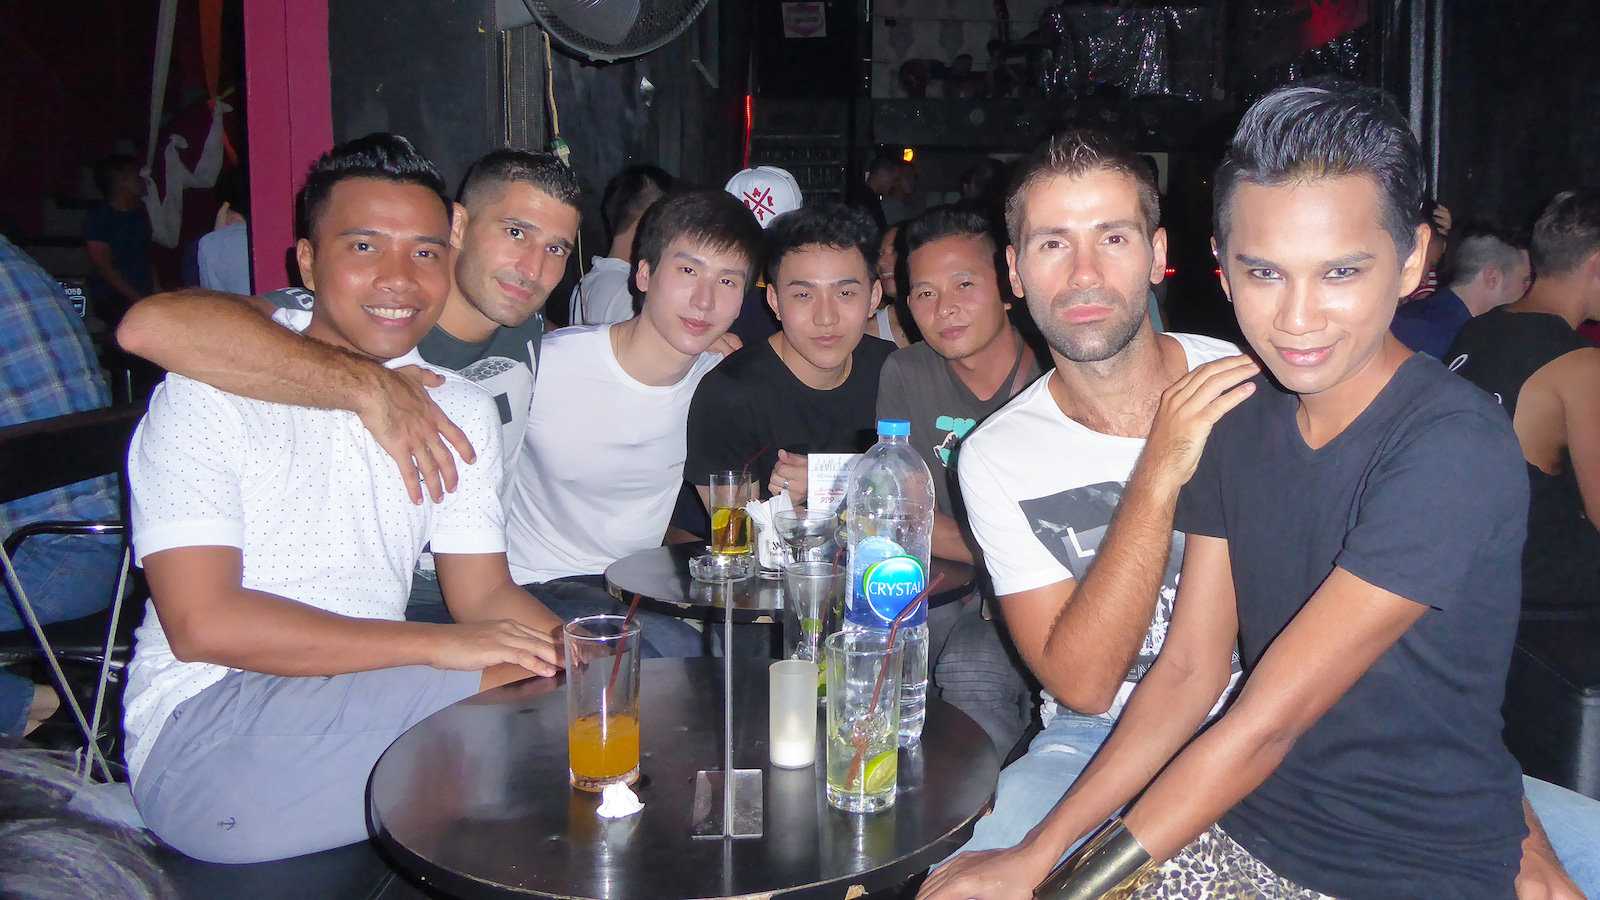 Stef and Seby with local friends in a bar in the Phra Khanong gay neighborhood of Bangkok.